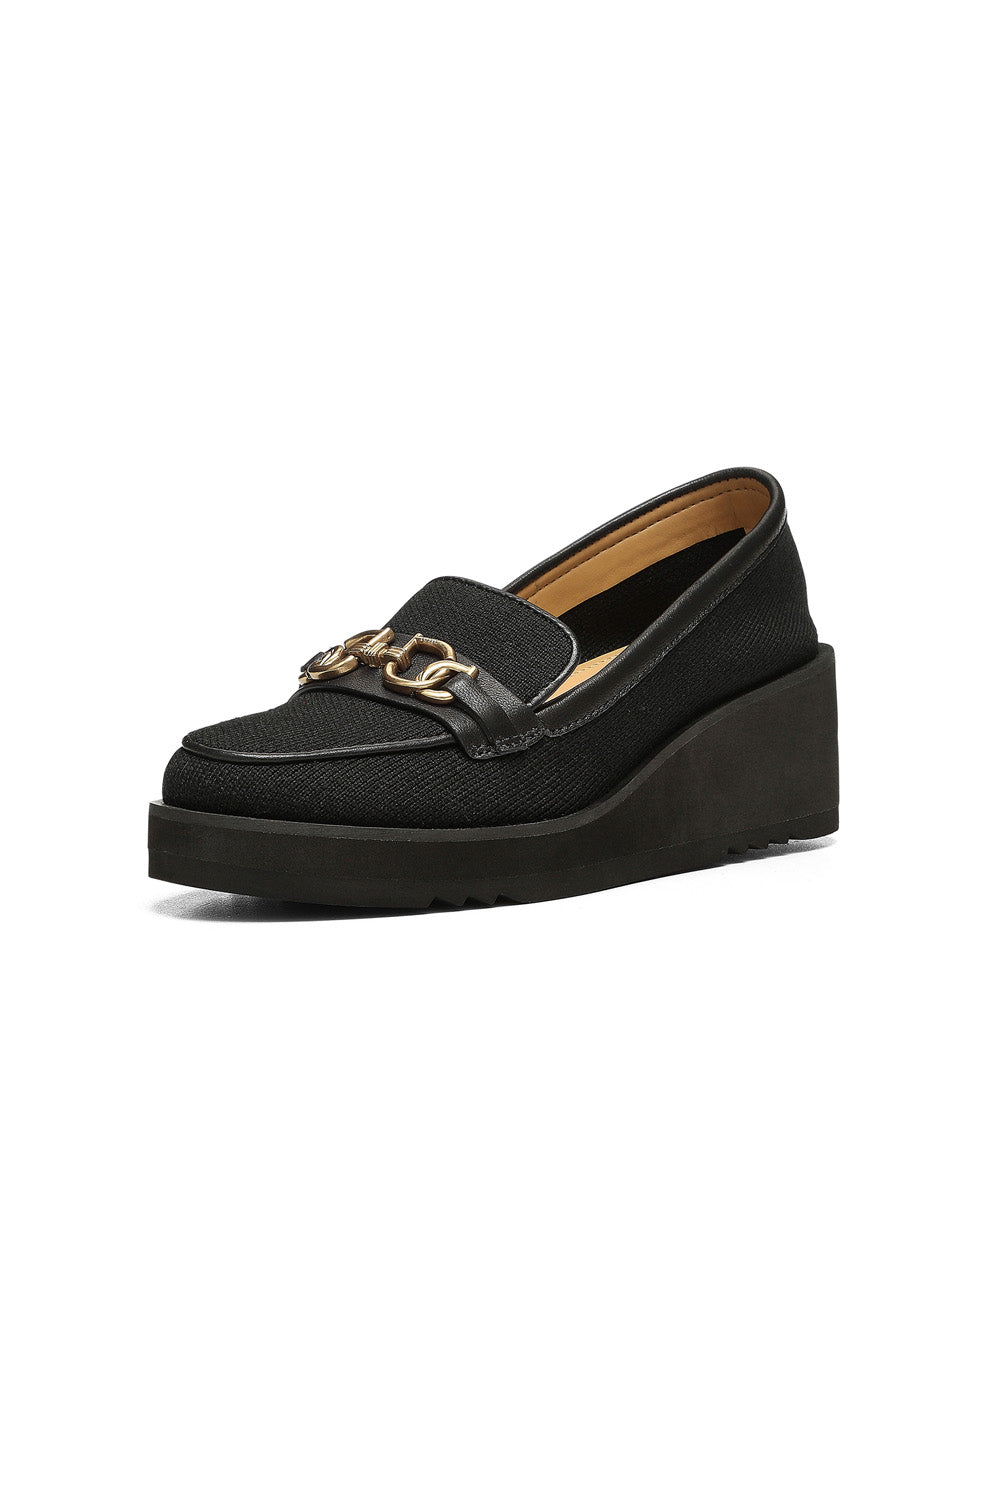 NYDJ Edward Wedge Loafers In Knit Fabric - Black